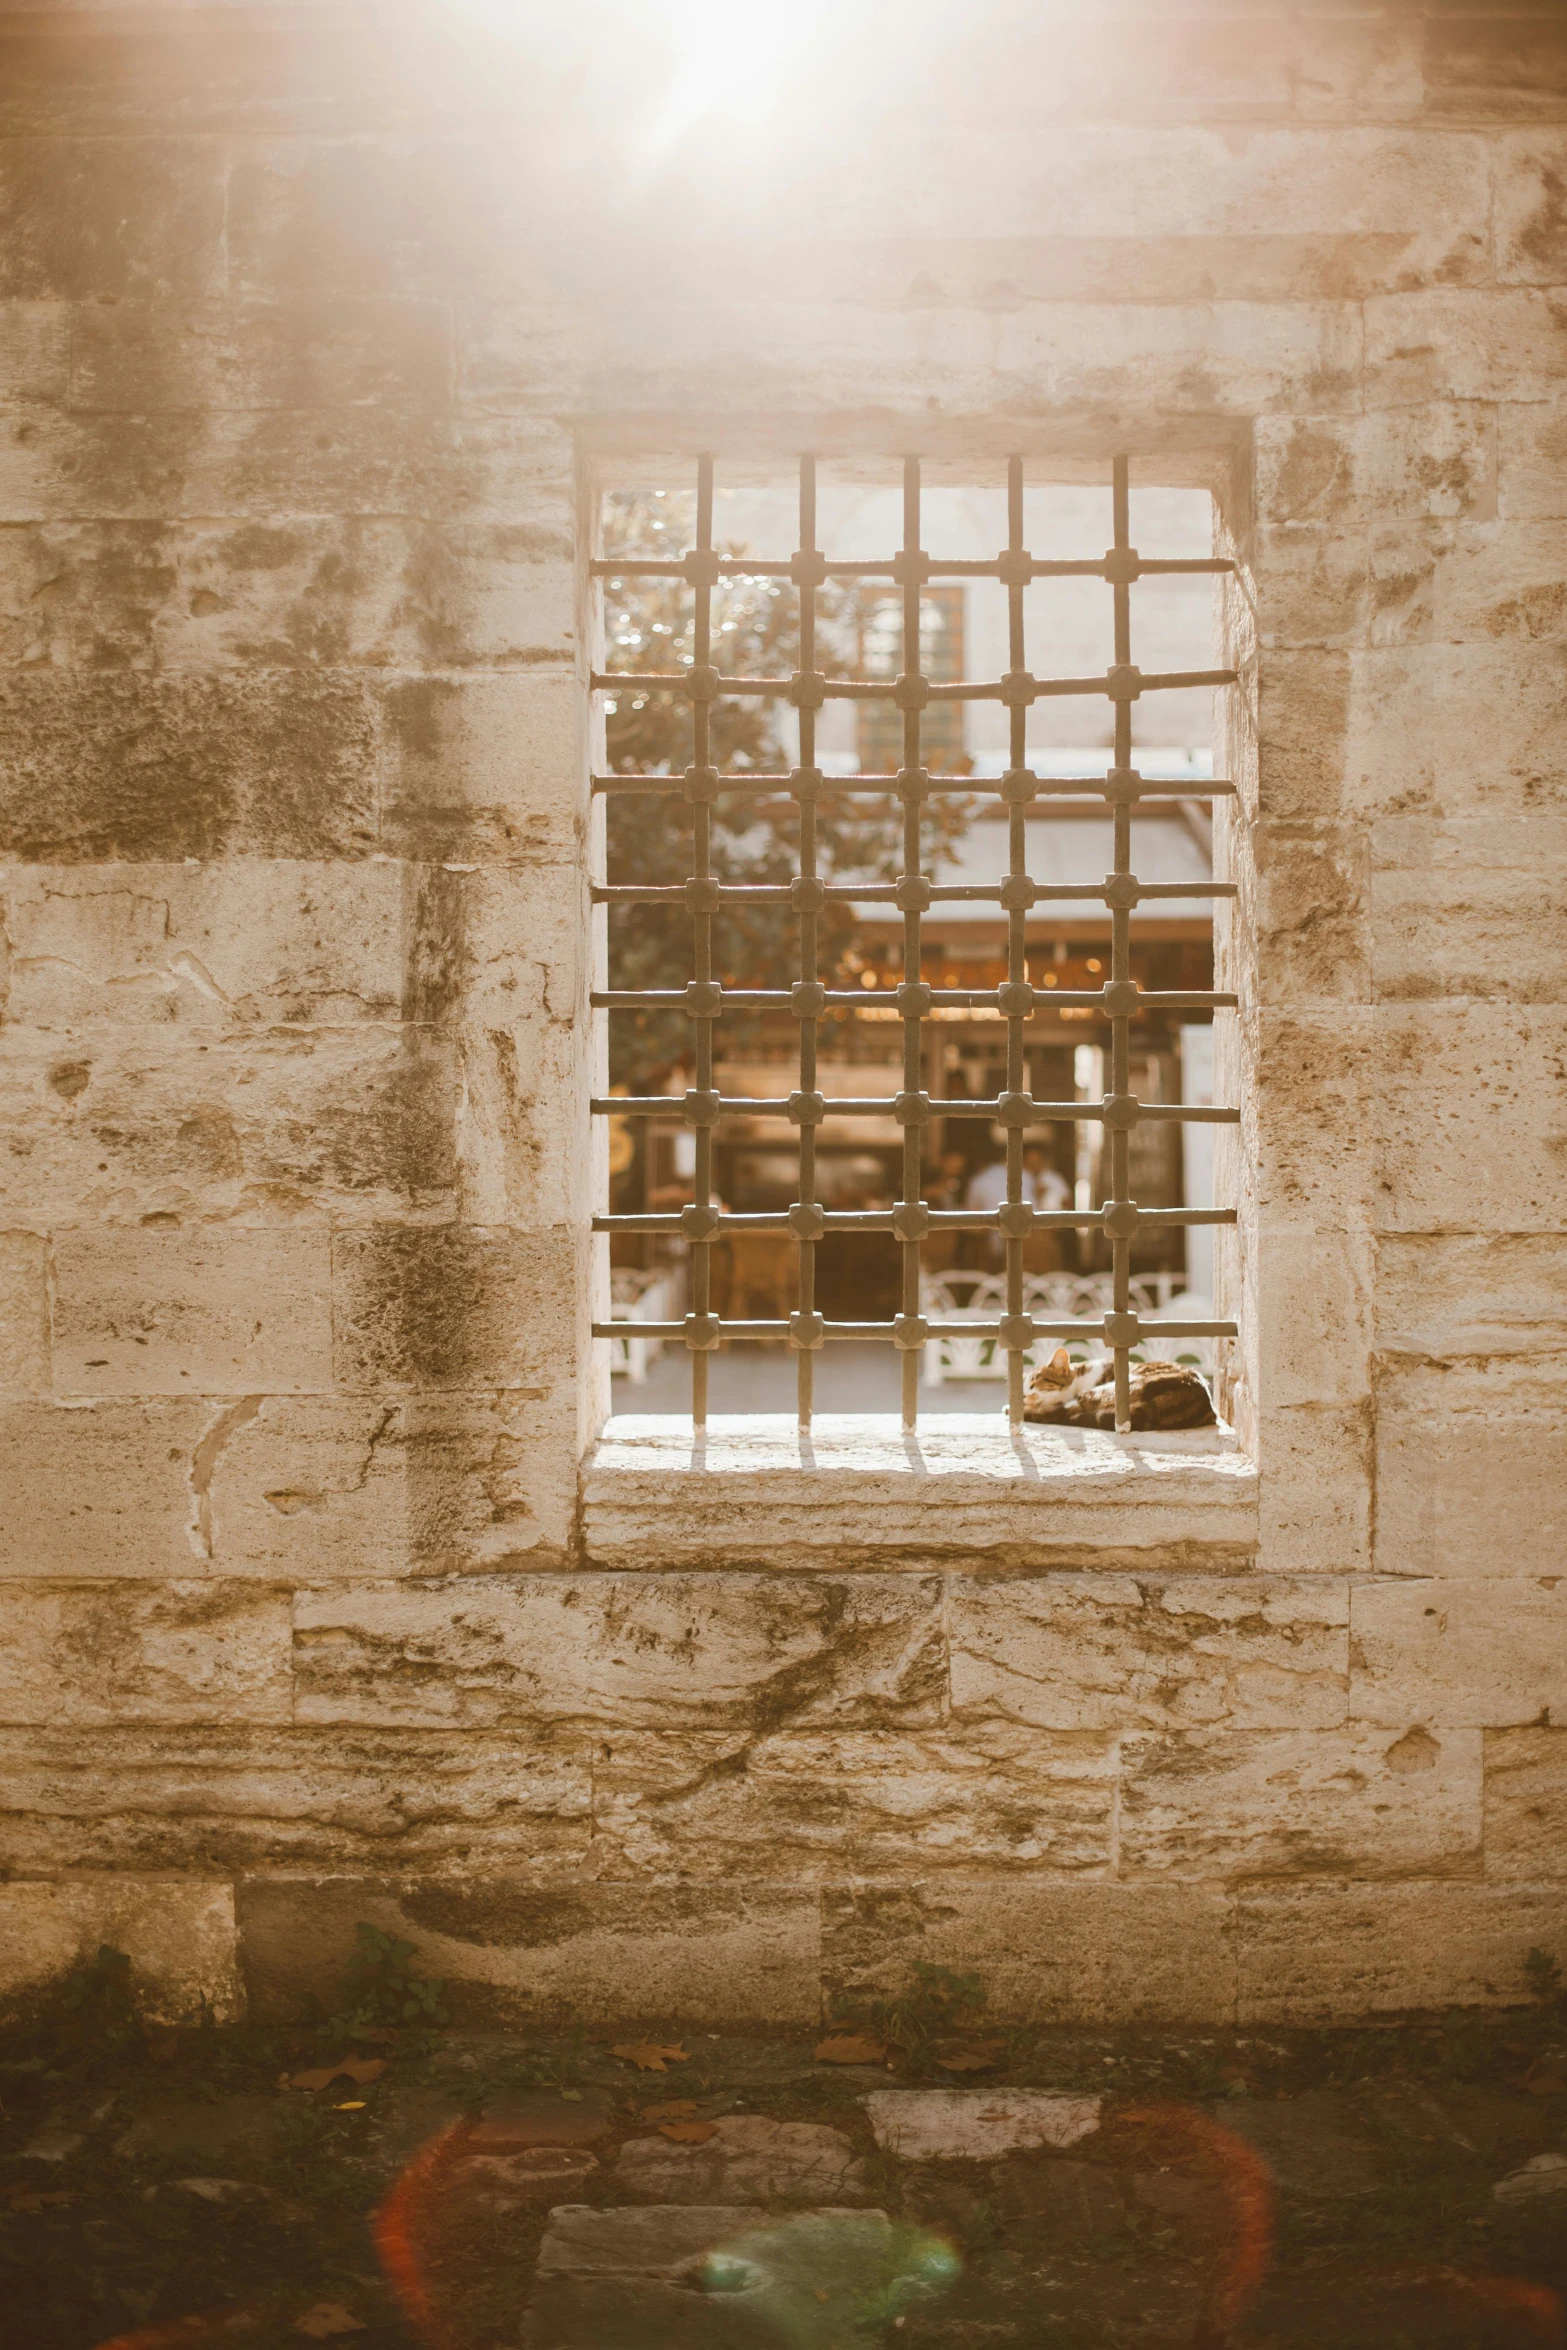 a fire hydrant sitting in front of a window, an album cover, inspired by Elsa Bleda, renaissance, behind bars, the western wall, vintage frame window, turkey